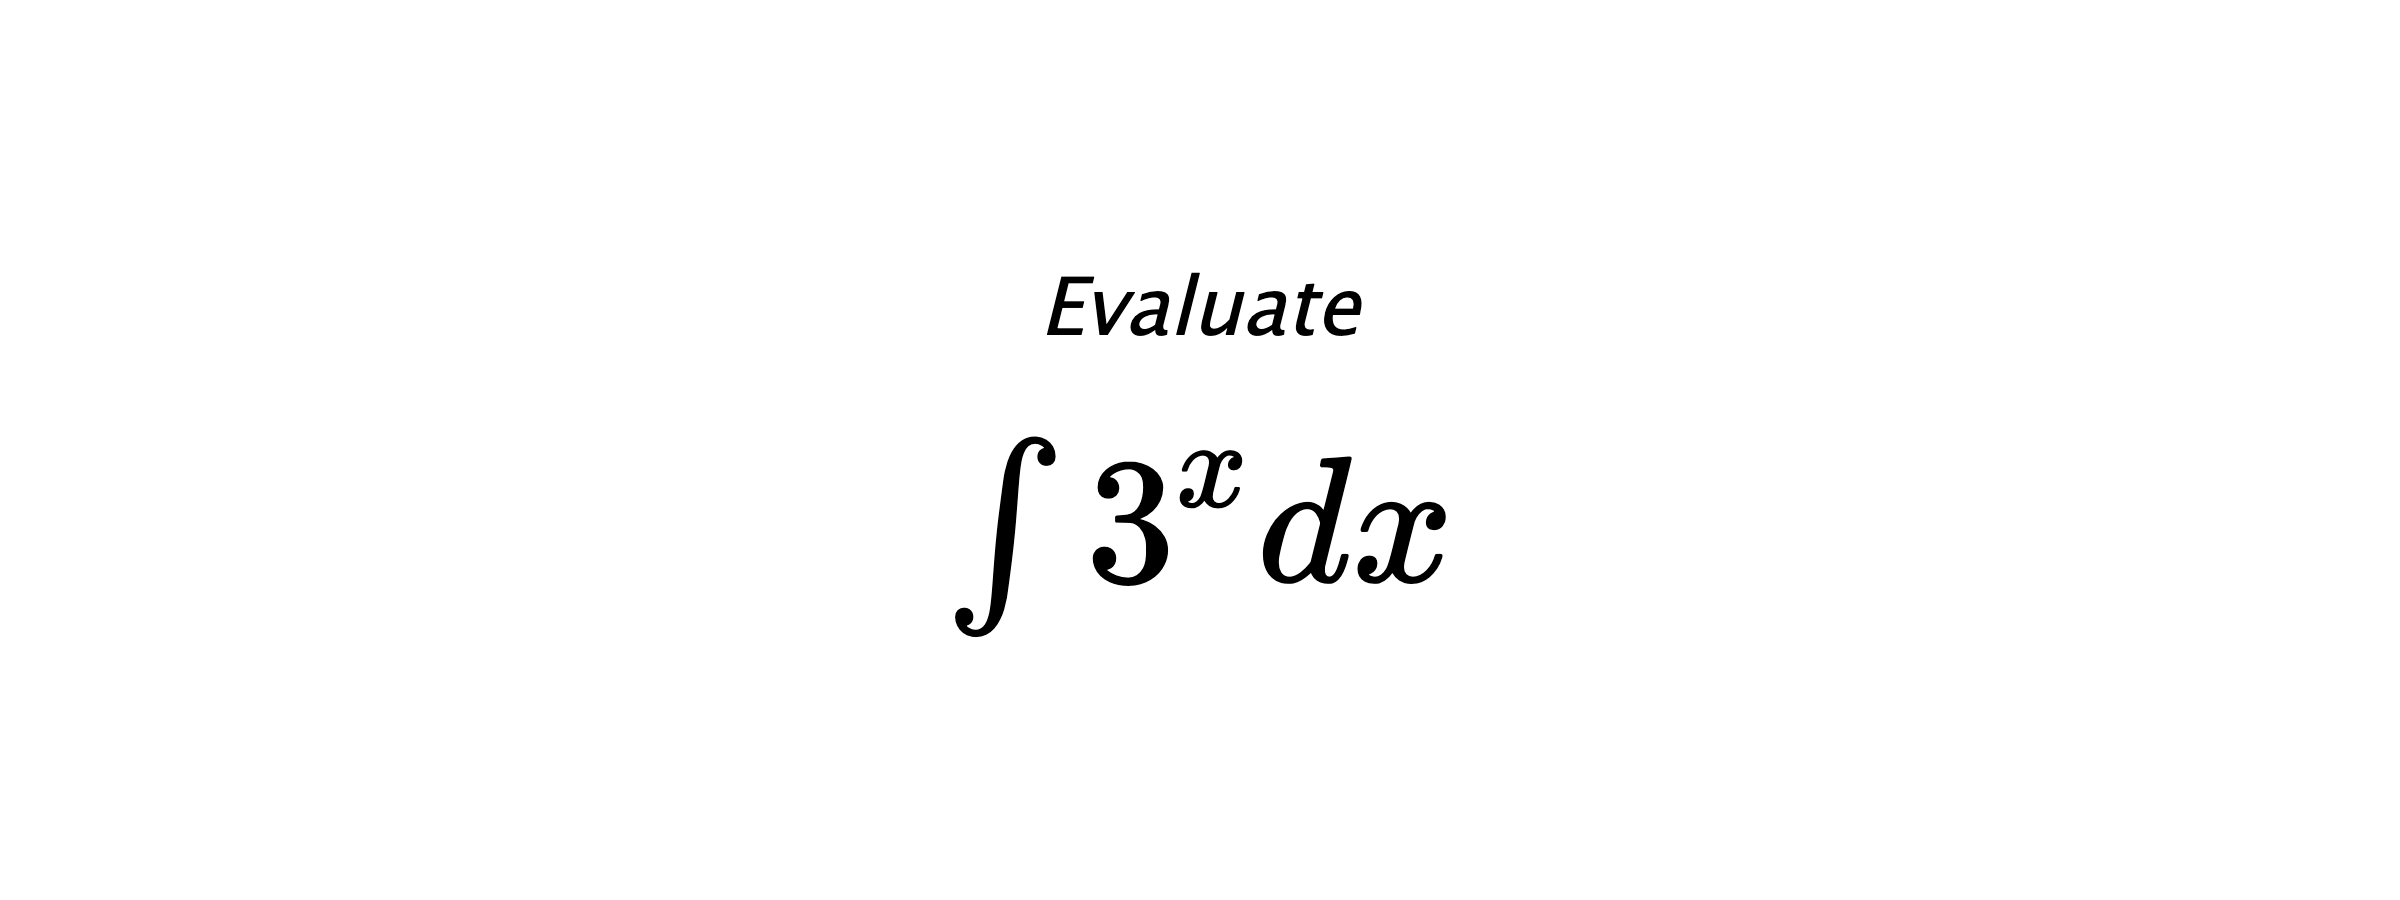 Evaluate $ \int 3^xdx $